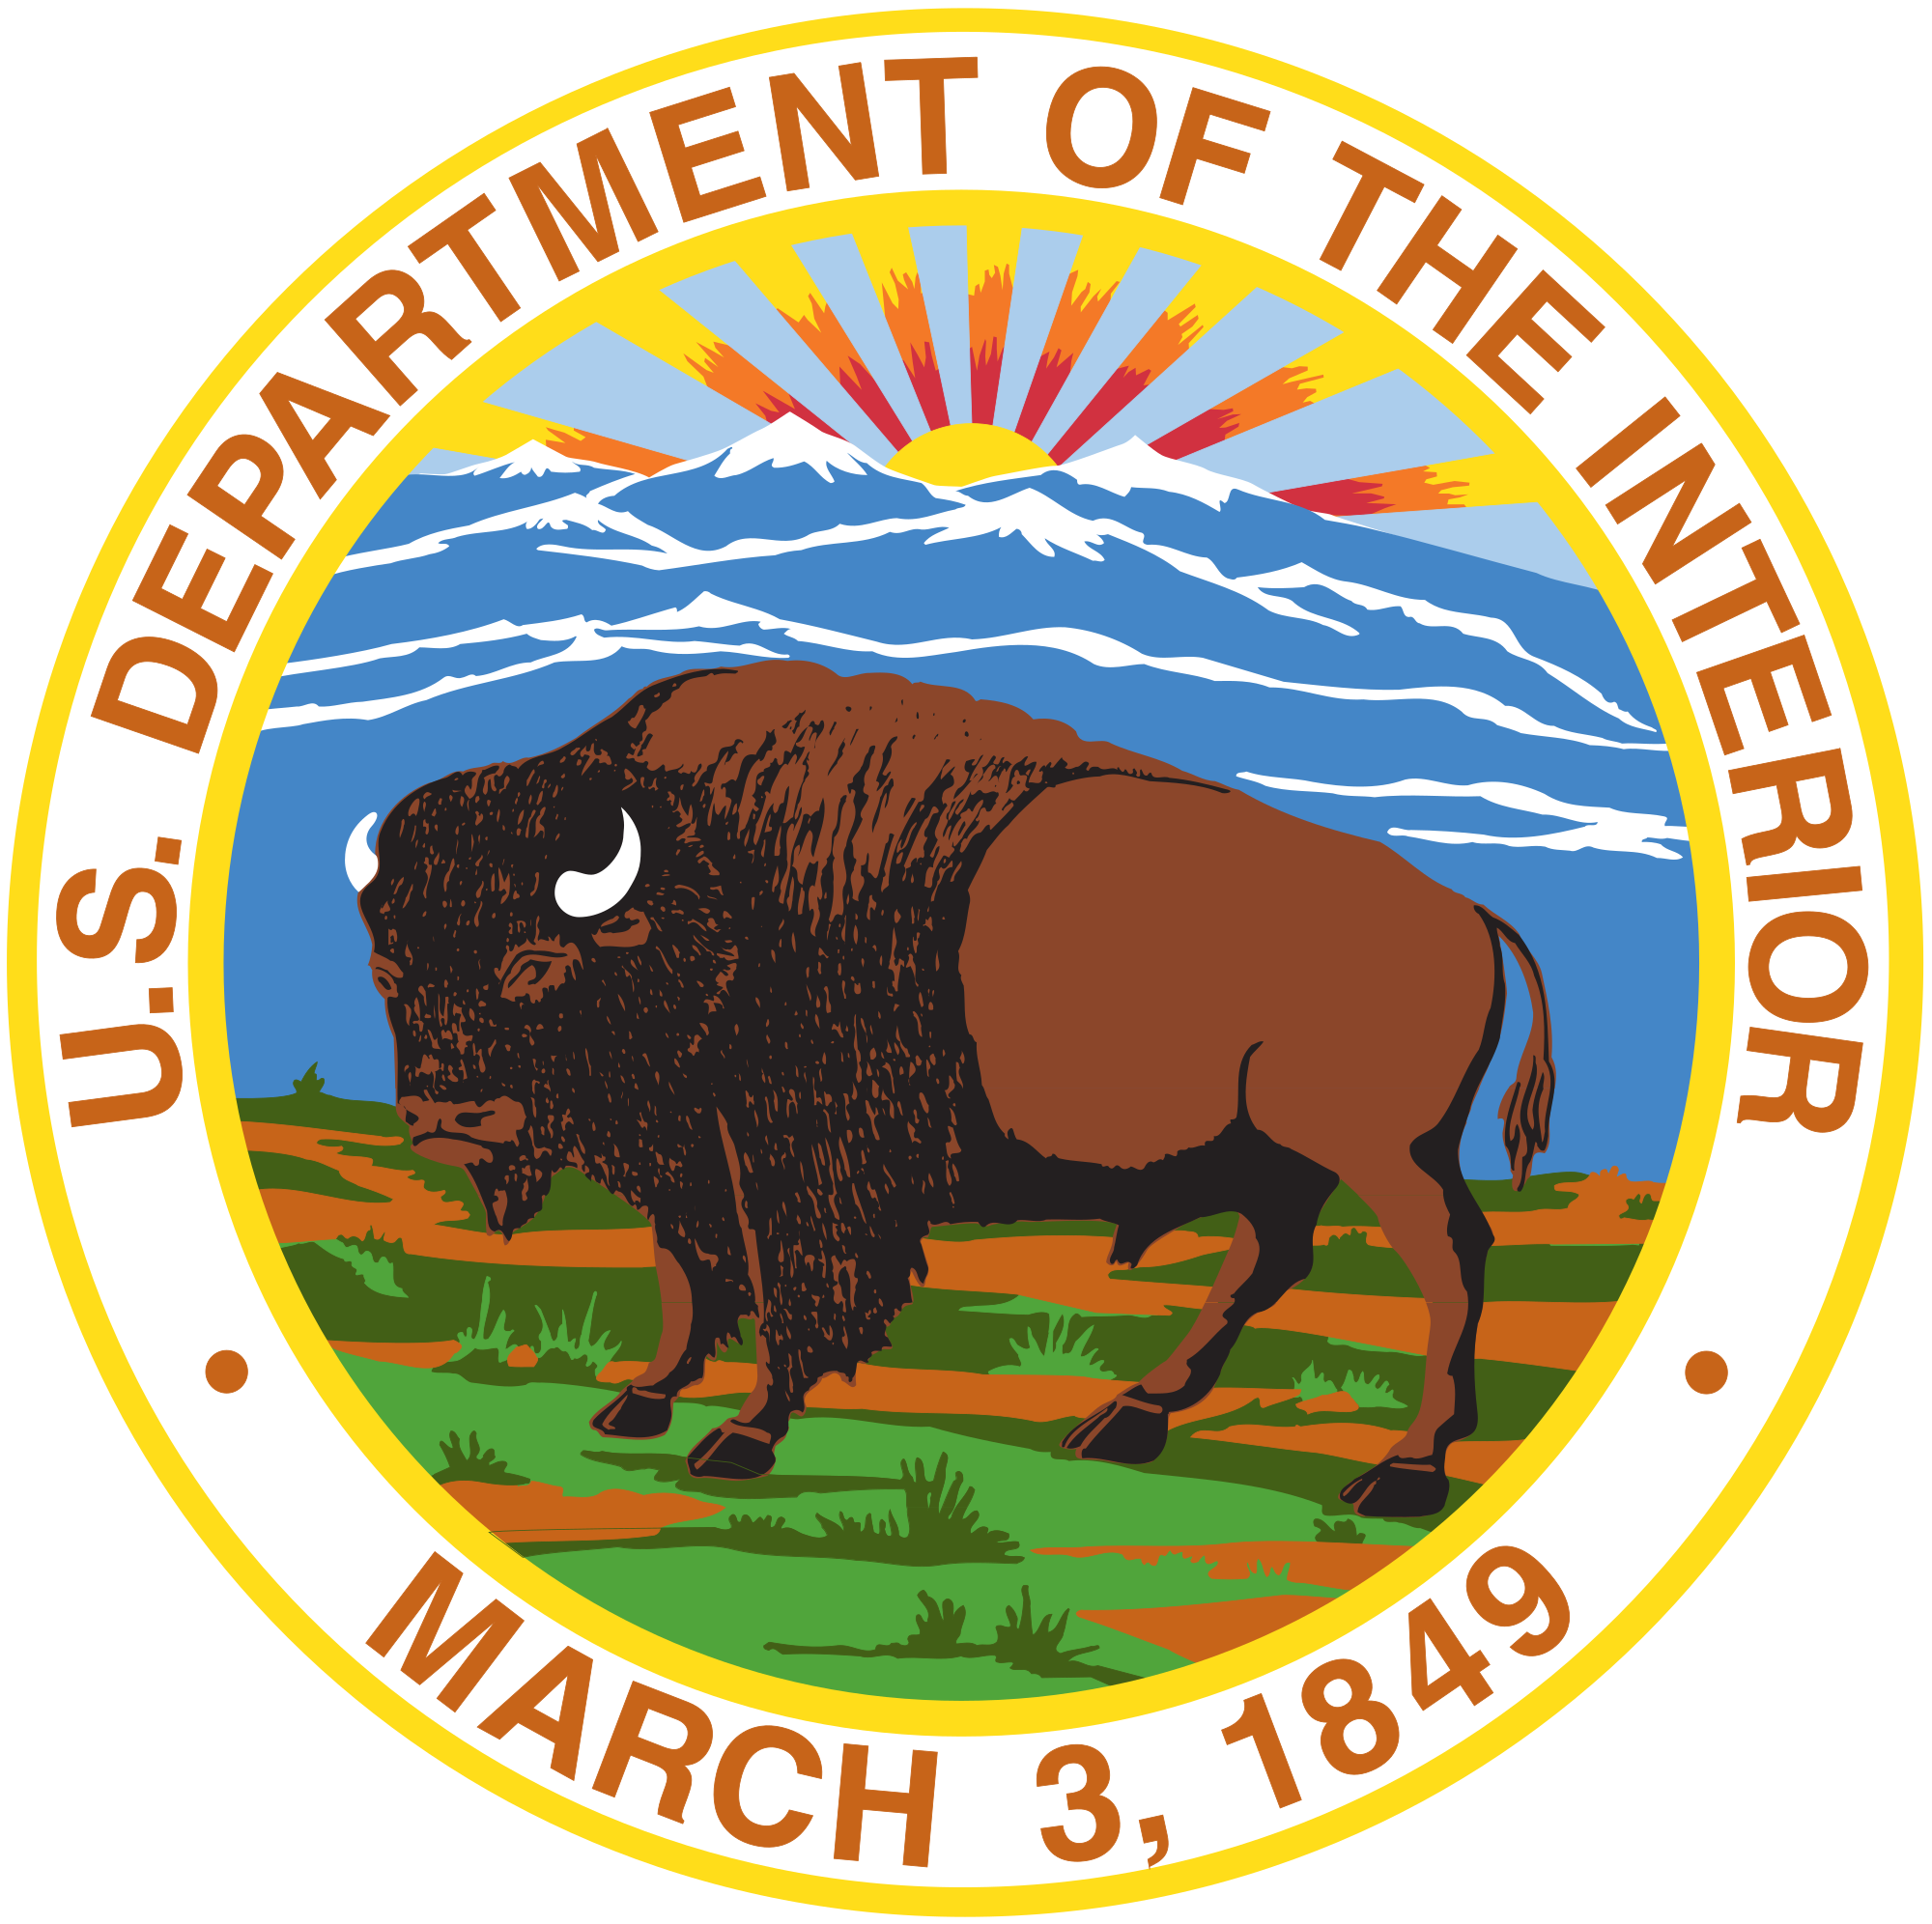 Seal Of The United States Department Of The Interior
(Logo 2007 U.S. Federal Government)